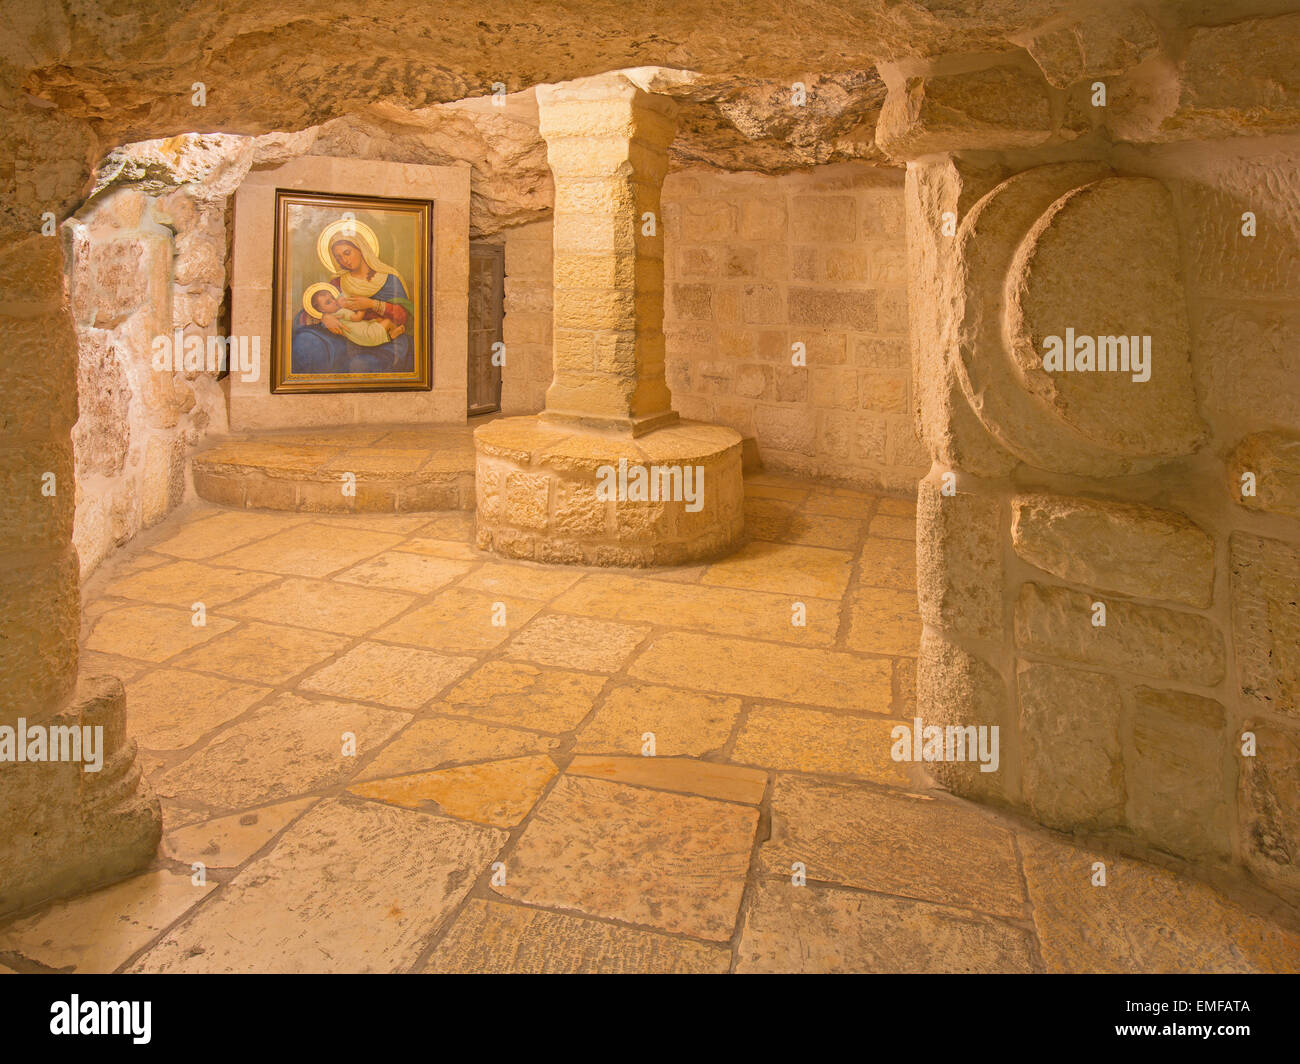 BETHLEHEM, ISRAEL - MARCH 6, 2015: The cave of "Milk Grotto" chapel. Stock Photo